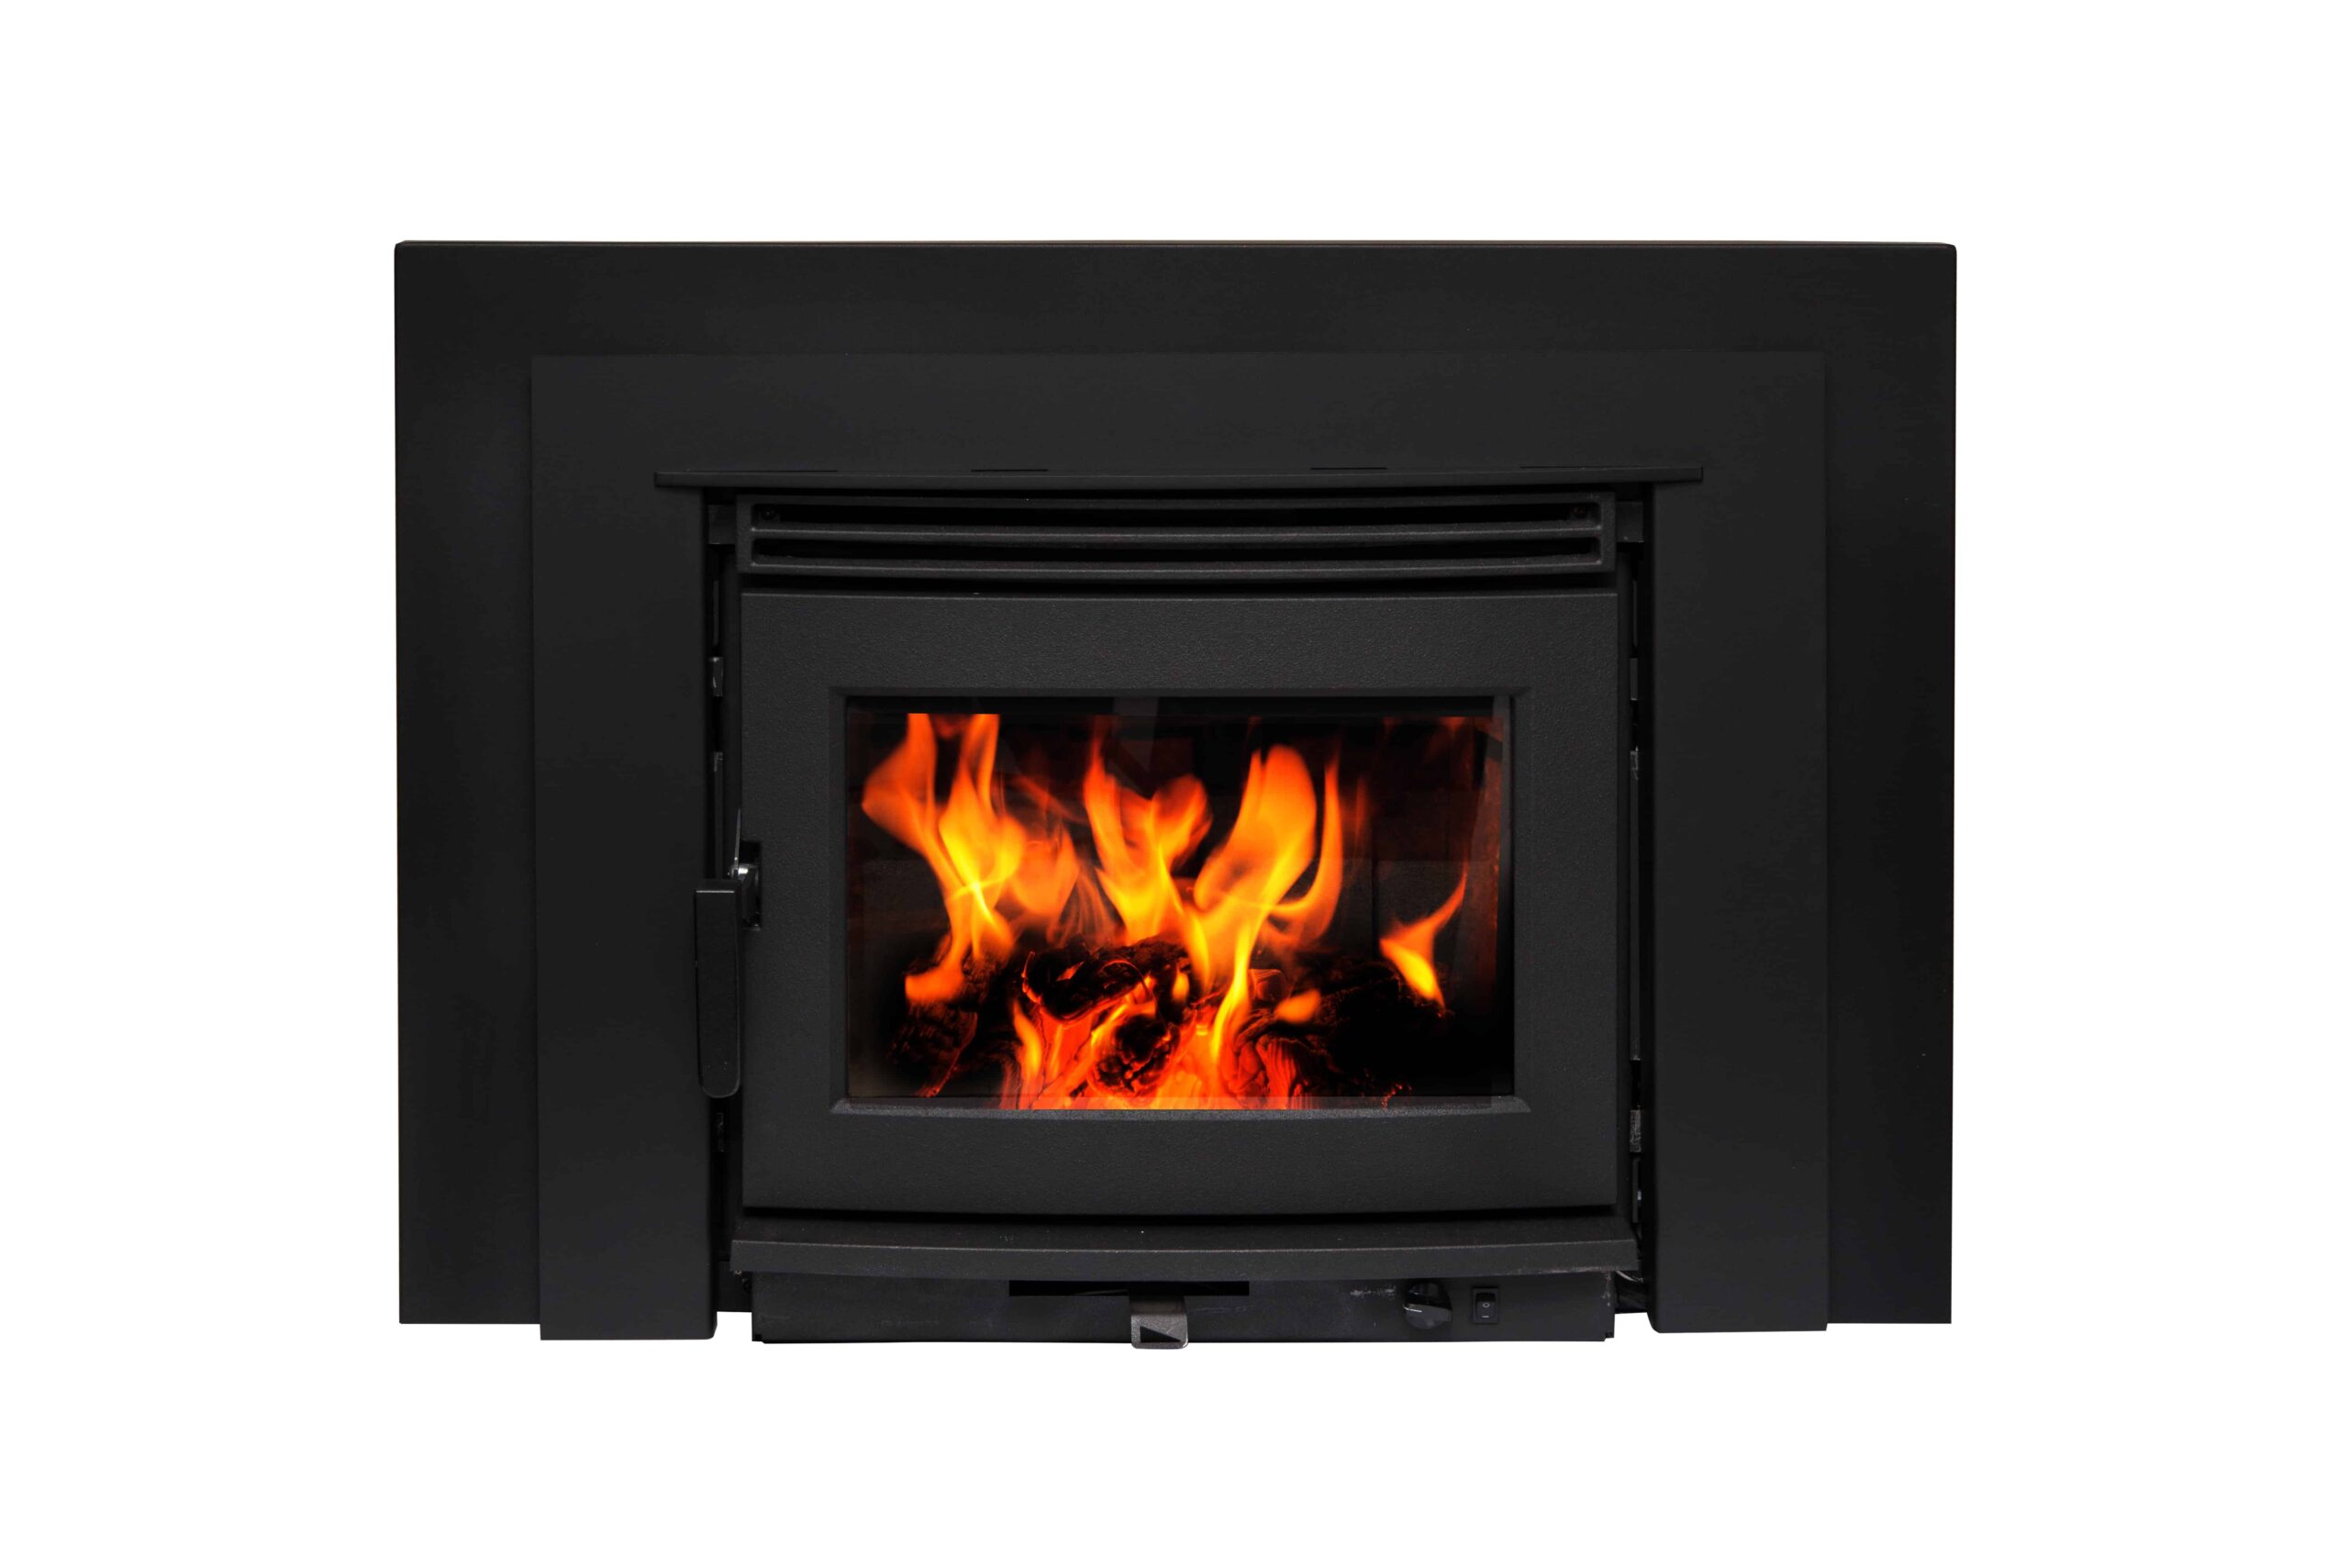 Pacific Energy Neo 1.6 wood insert with black trim